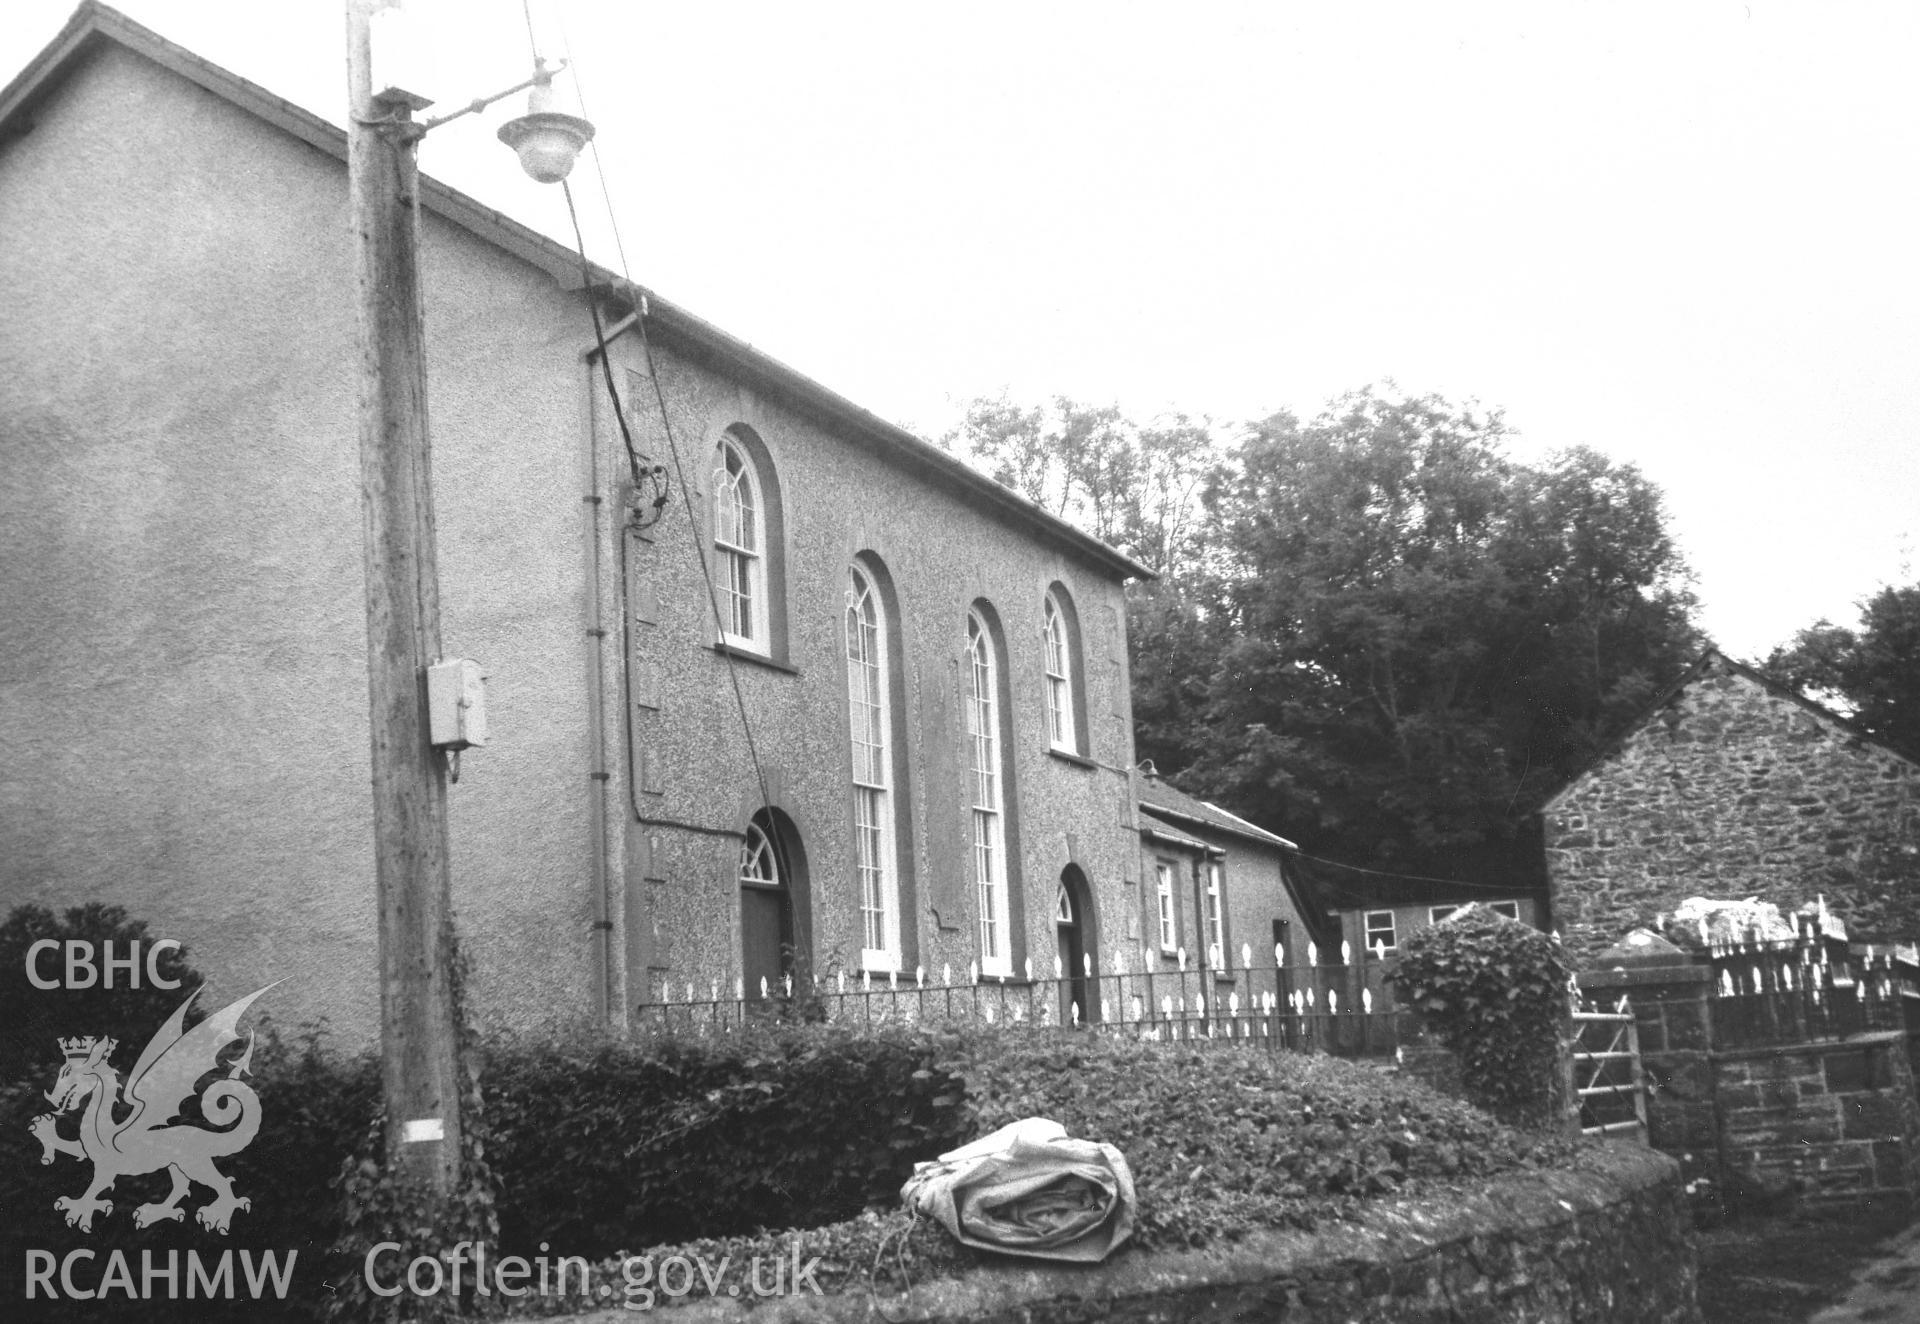 Digital copy of a black and white photograph showing an exterior view of Nanternis Independent Chapel, taken by Robert Scourfield, 1995.